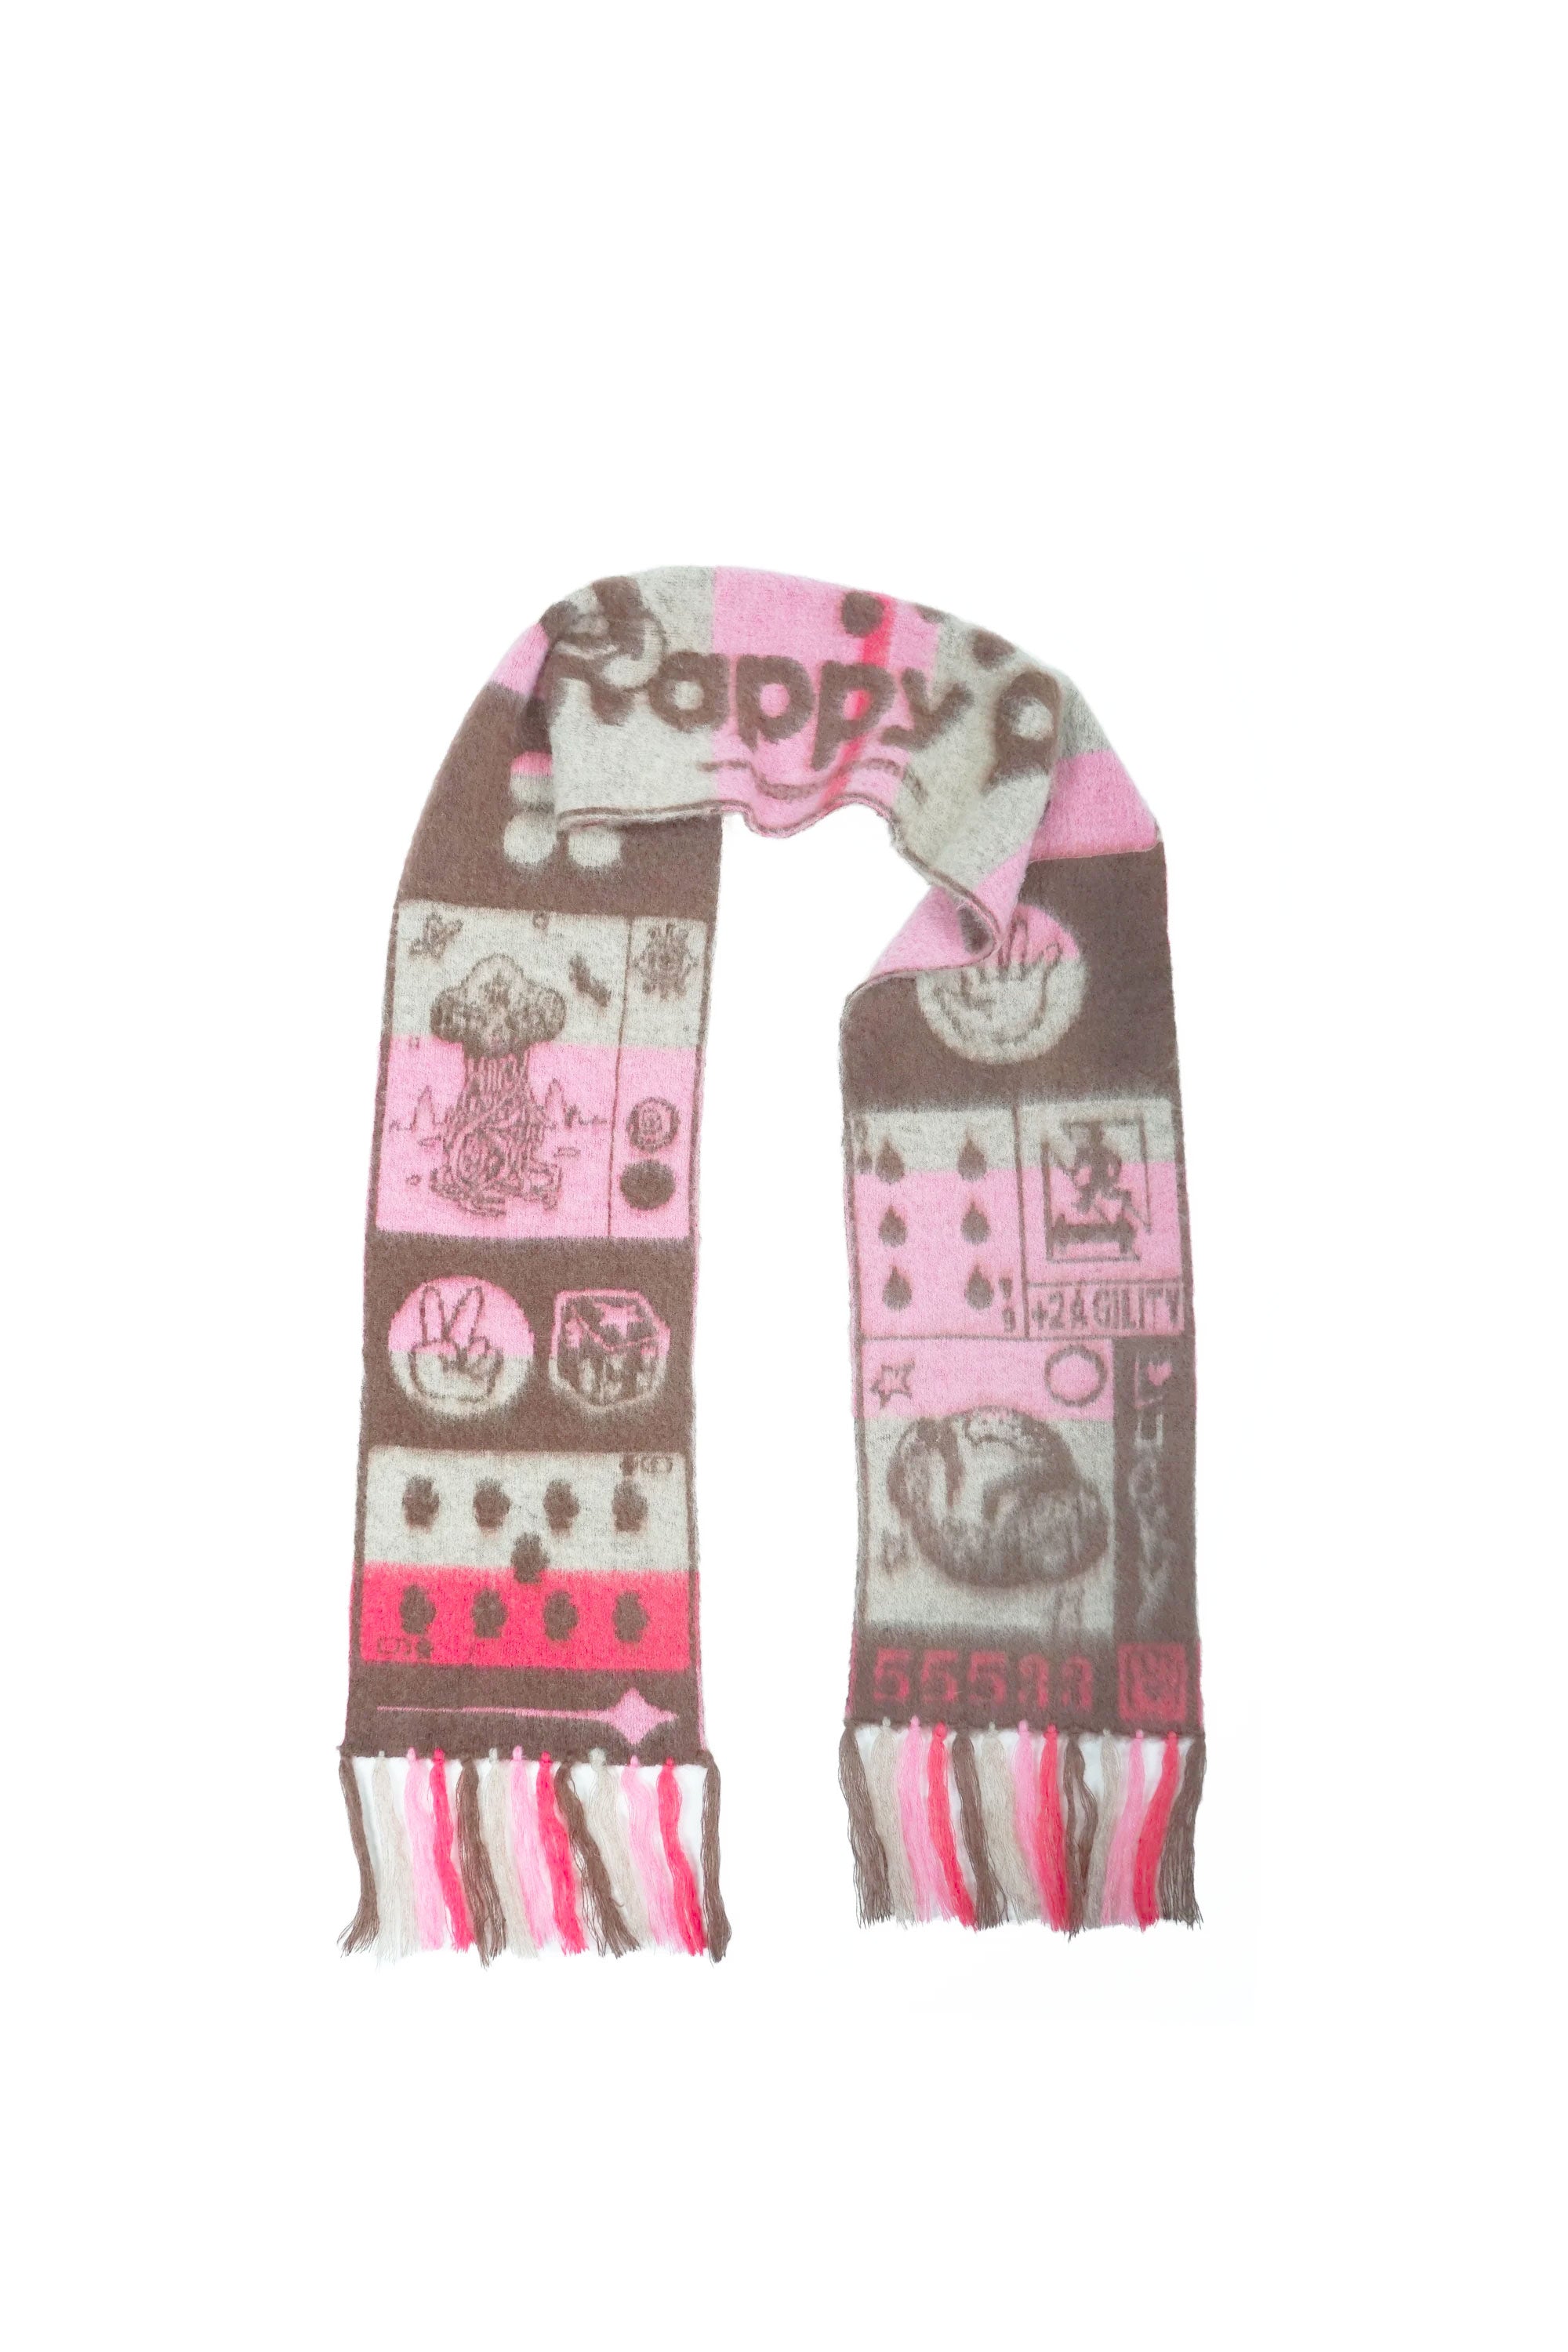 The HAPPY 99 - +2 AGILITY SCARF PINK BROWN available online with global shipping, and in PAM Stores Melbourne and Sydney.